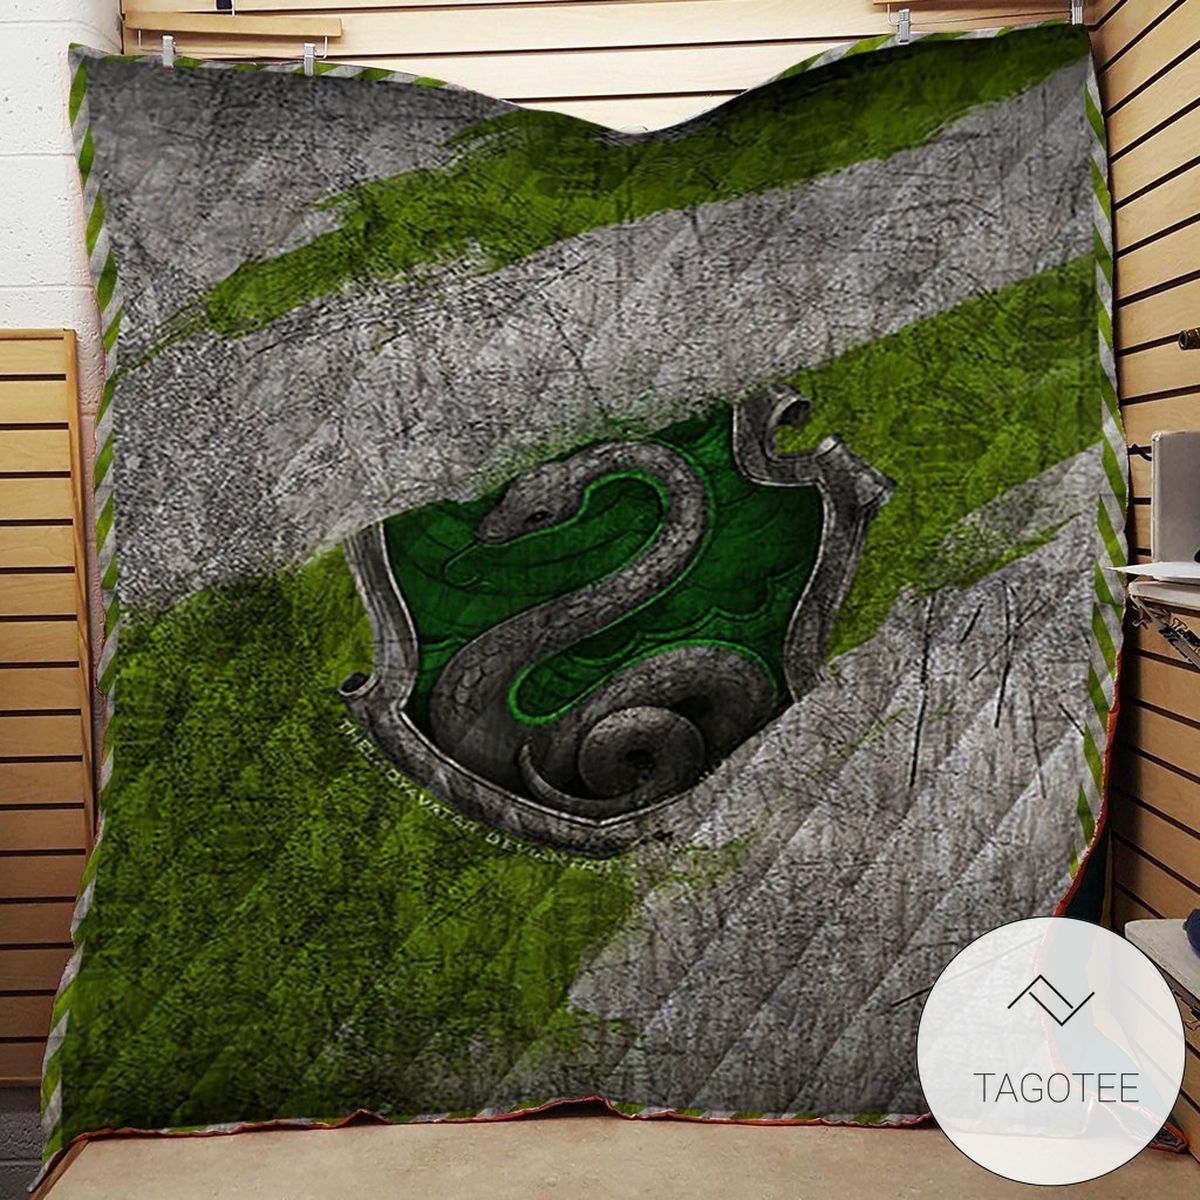 The Slytherin House Harry Potter 3D Quilt Blanket